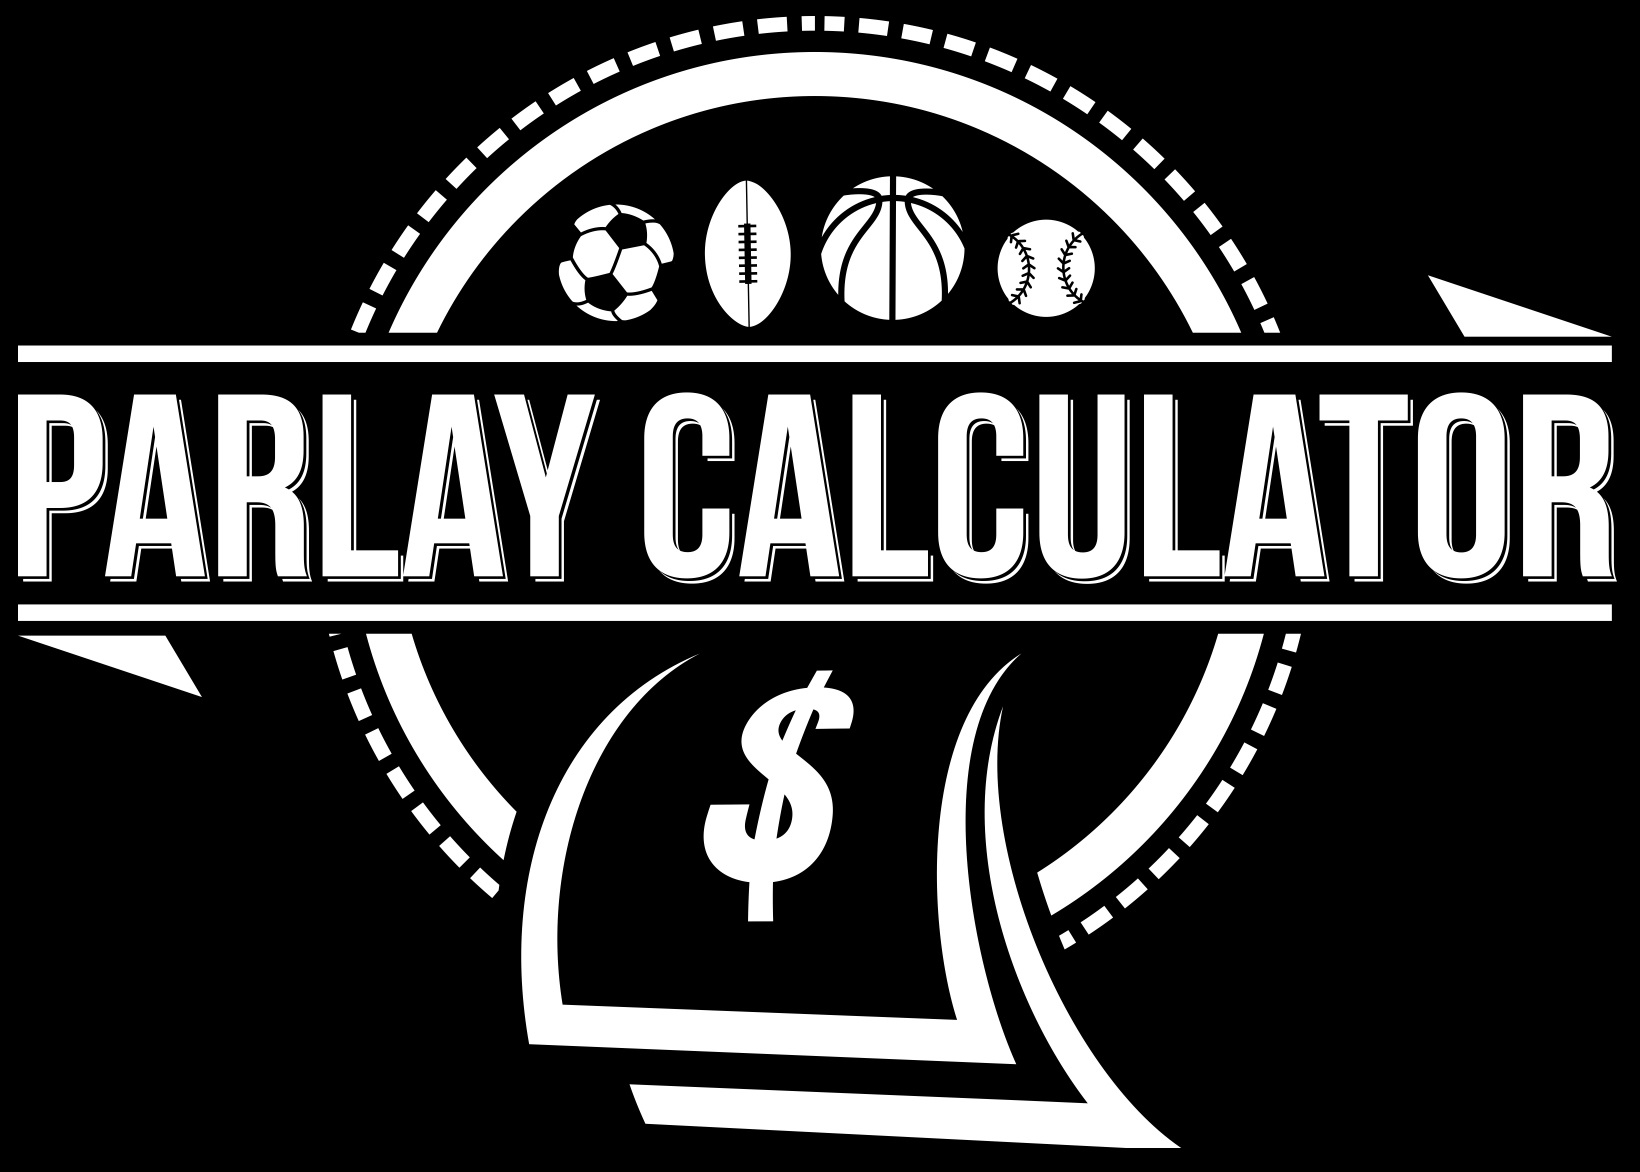 which forms do parlay bonuses and promotions have